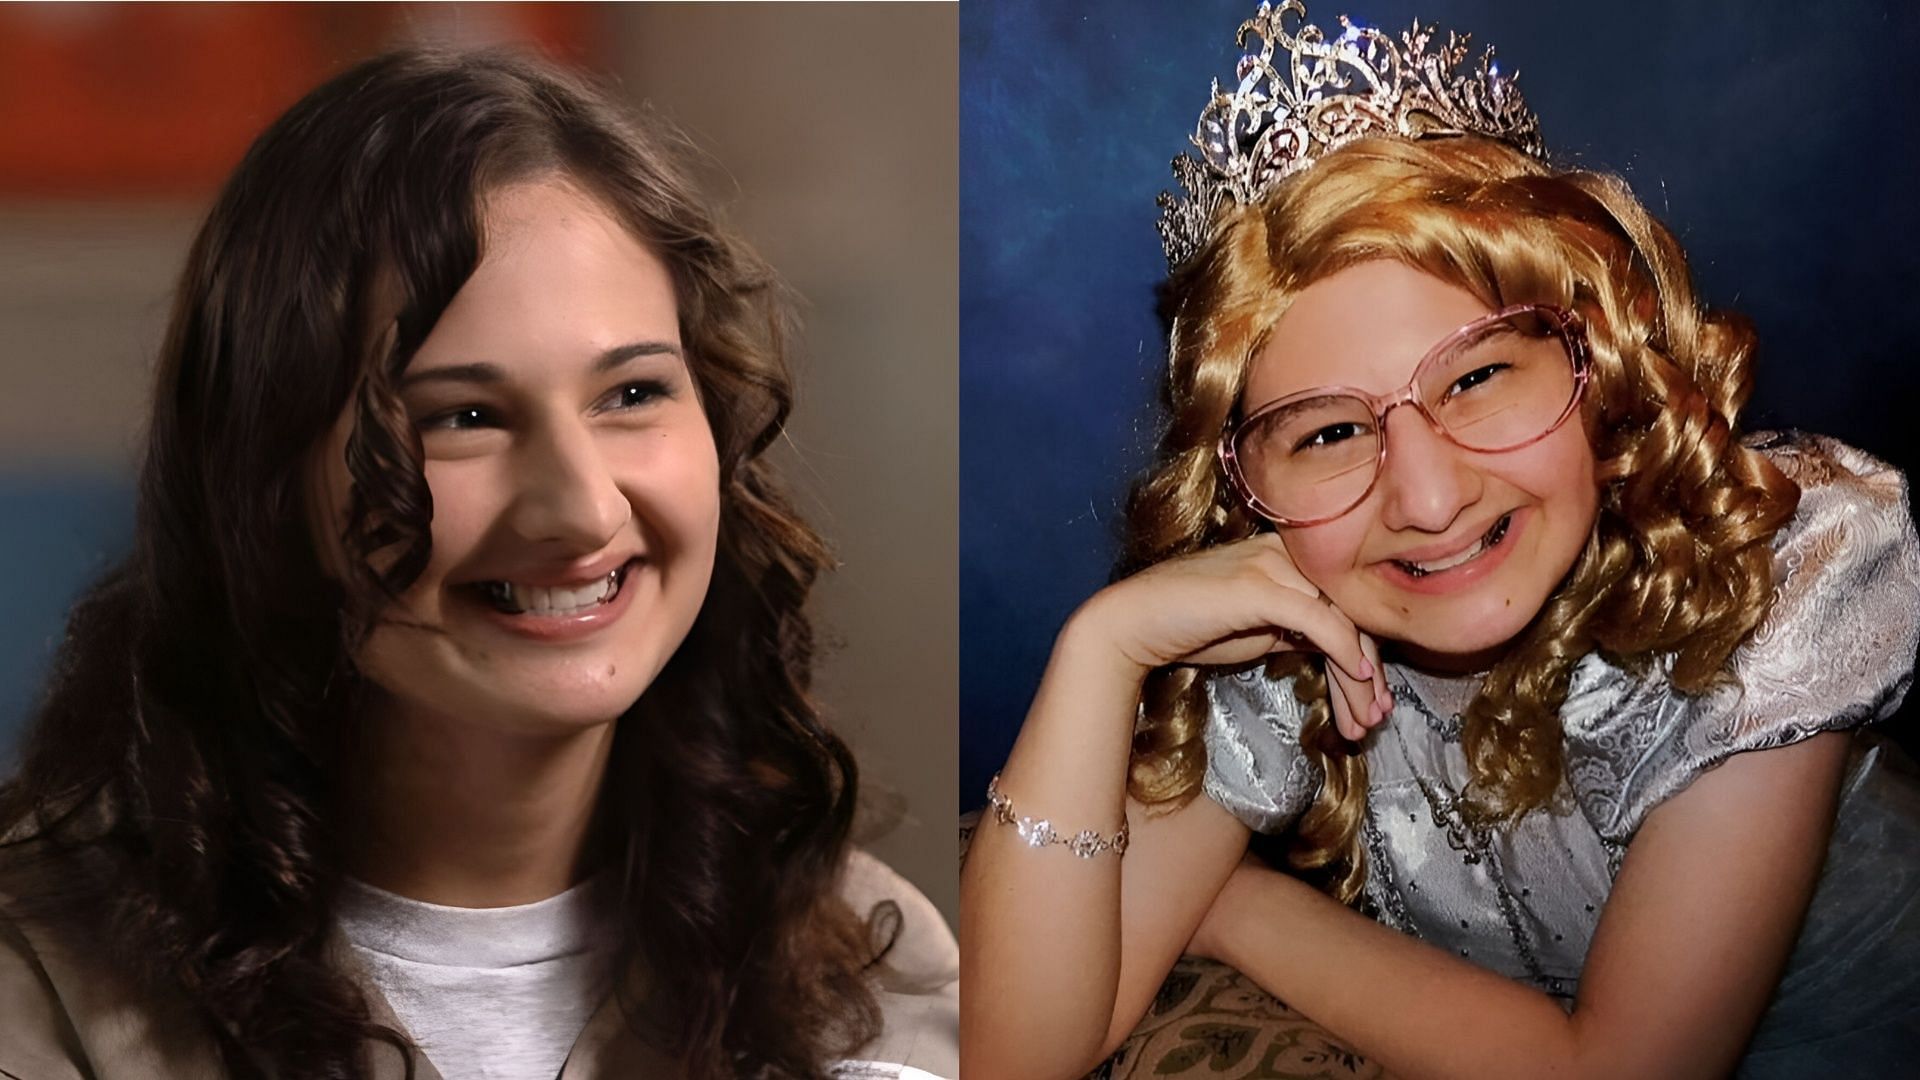 Gypsy Rose Blanchard is finally released from prison after serving 85% of her 10-year sentence. (Image via X/@cronipiatw, @tracklist)